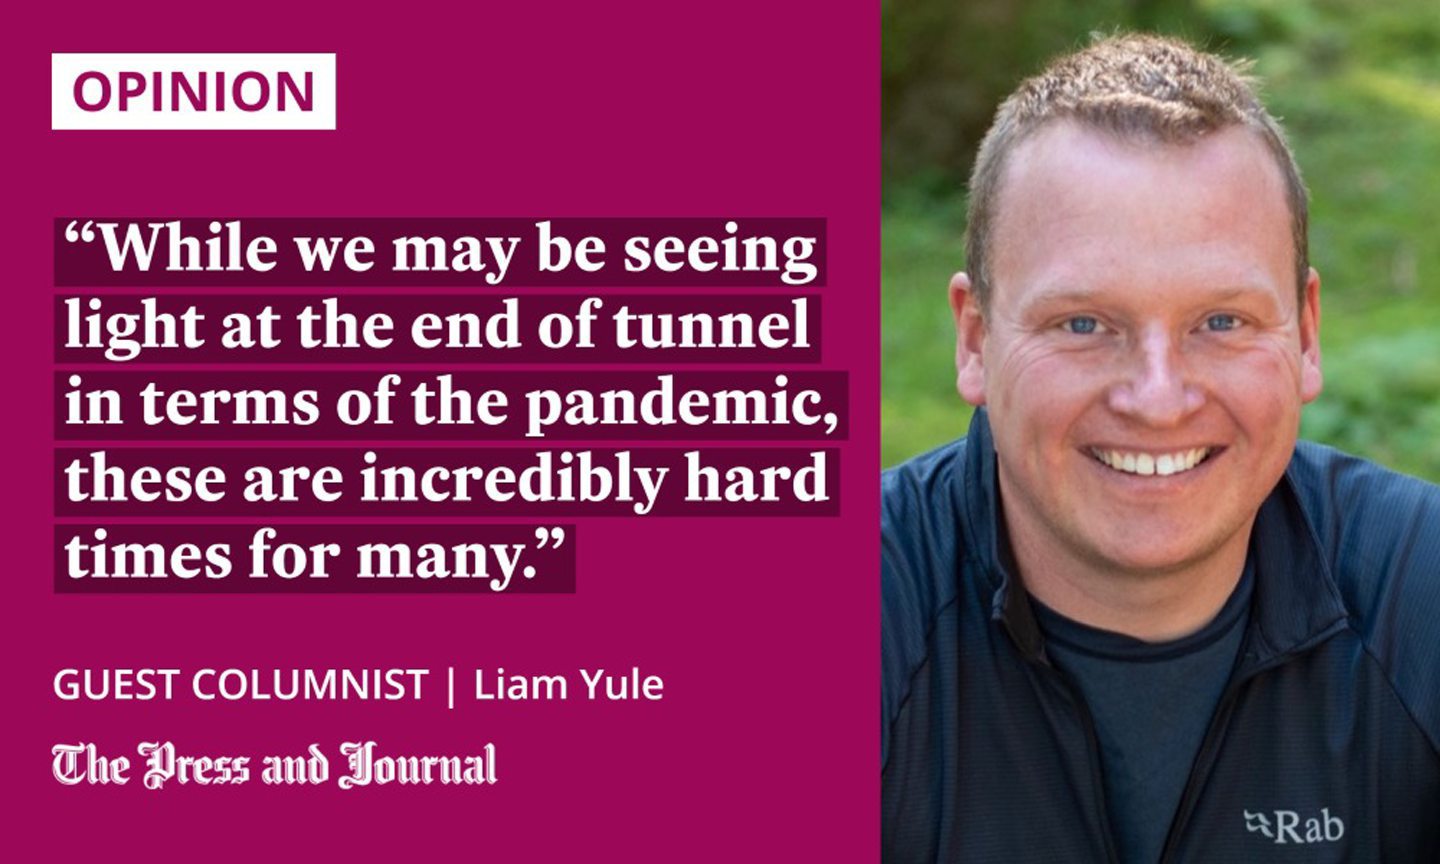 Guest columnist, Liam Yule, speaks about mental health of scots after the pandemic, "while we may be seeing light at the end of tunnel in terms of the pandemic, these are incredibly hard times for many."